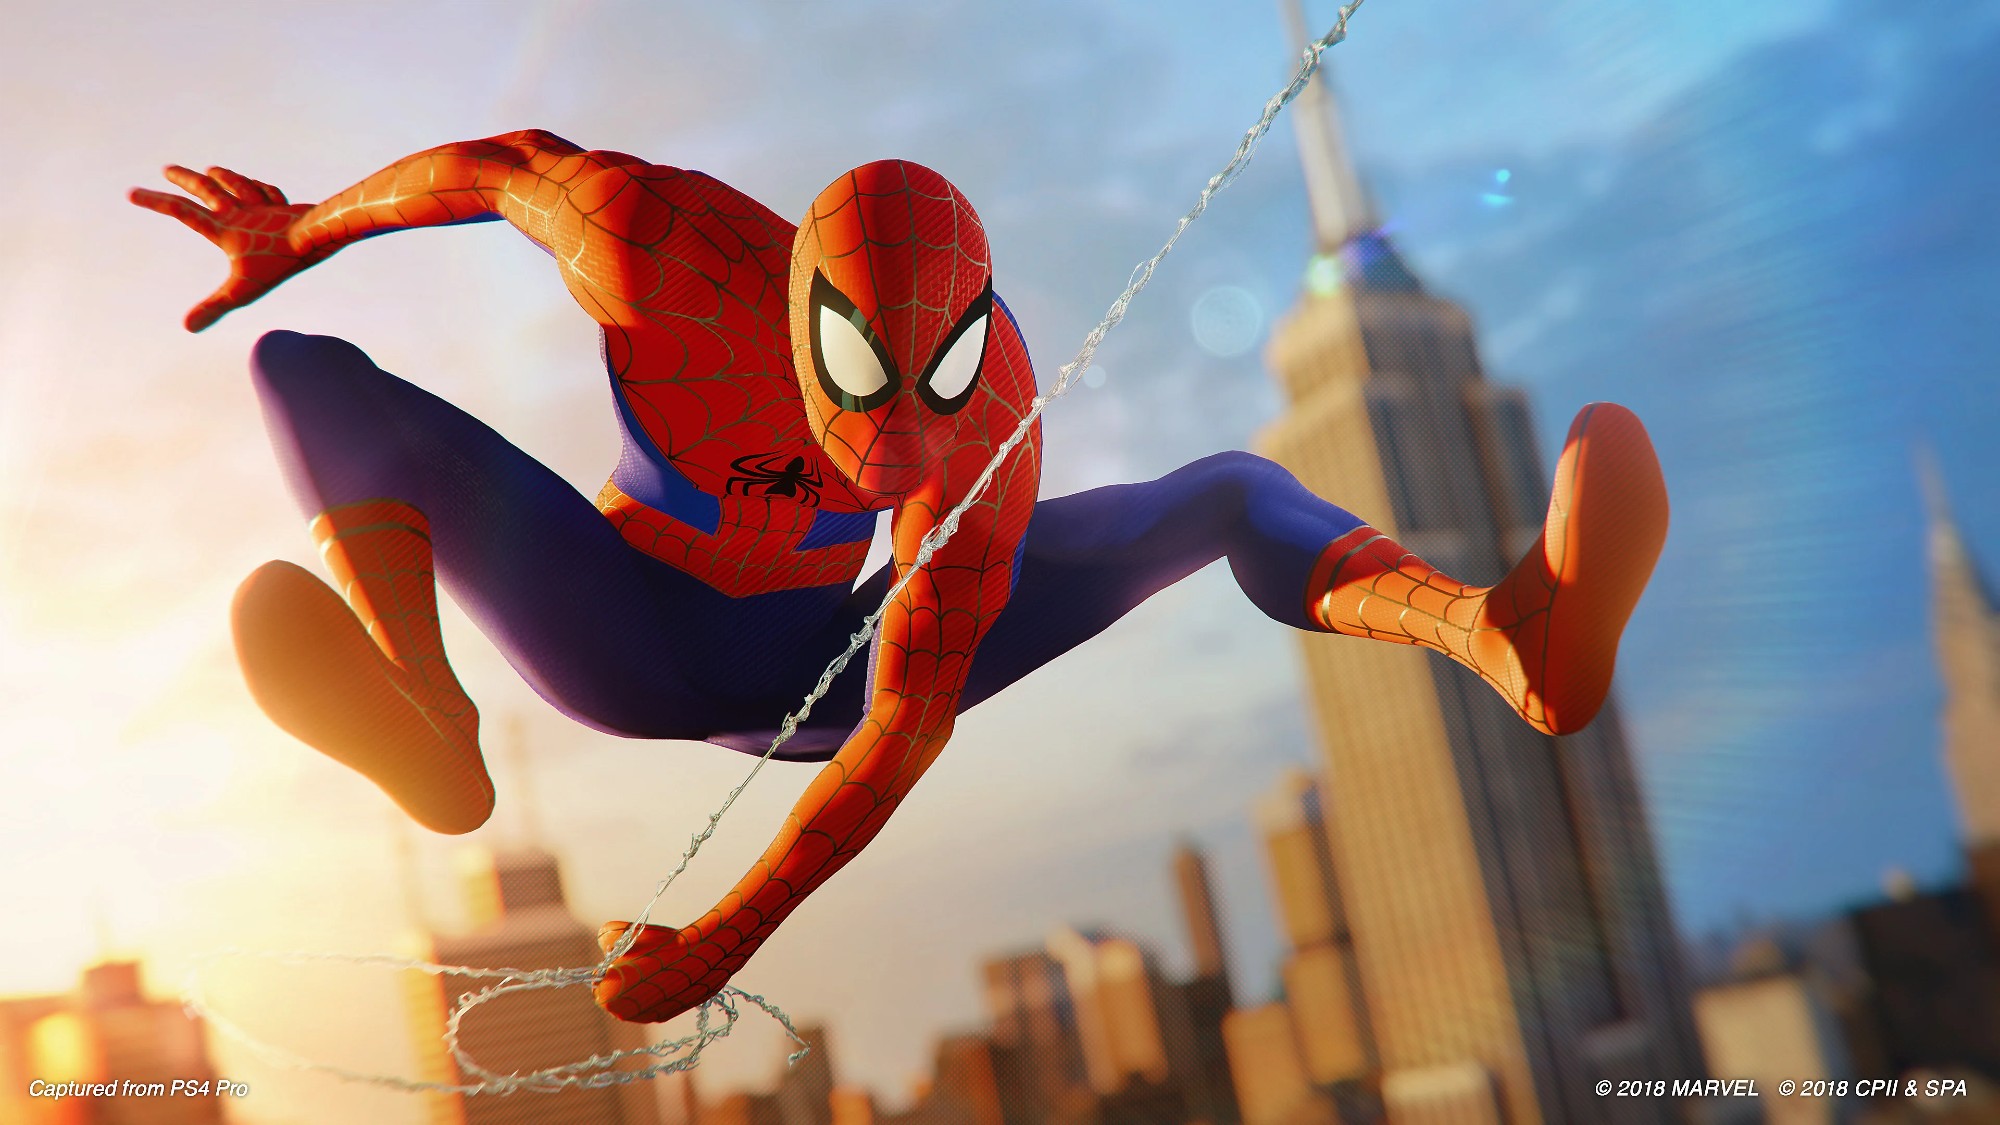 Spider-Man 2, the New Insomniac Game, Can Teach Marvel a Lesson